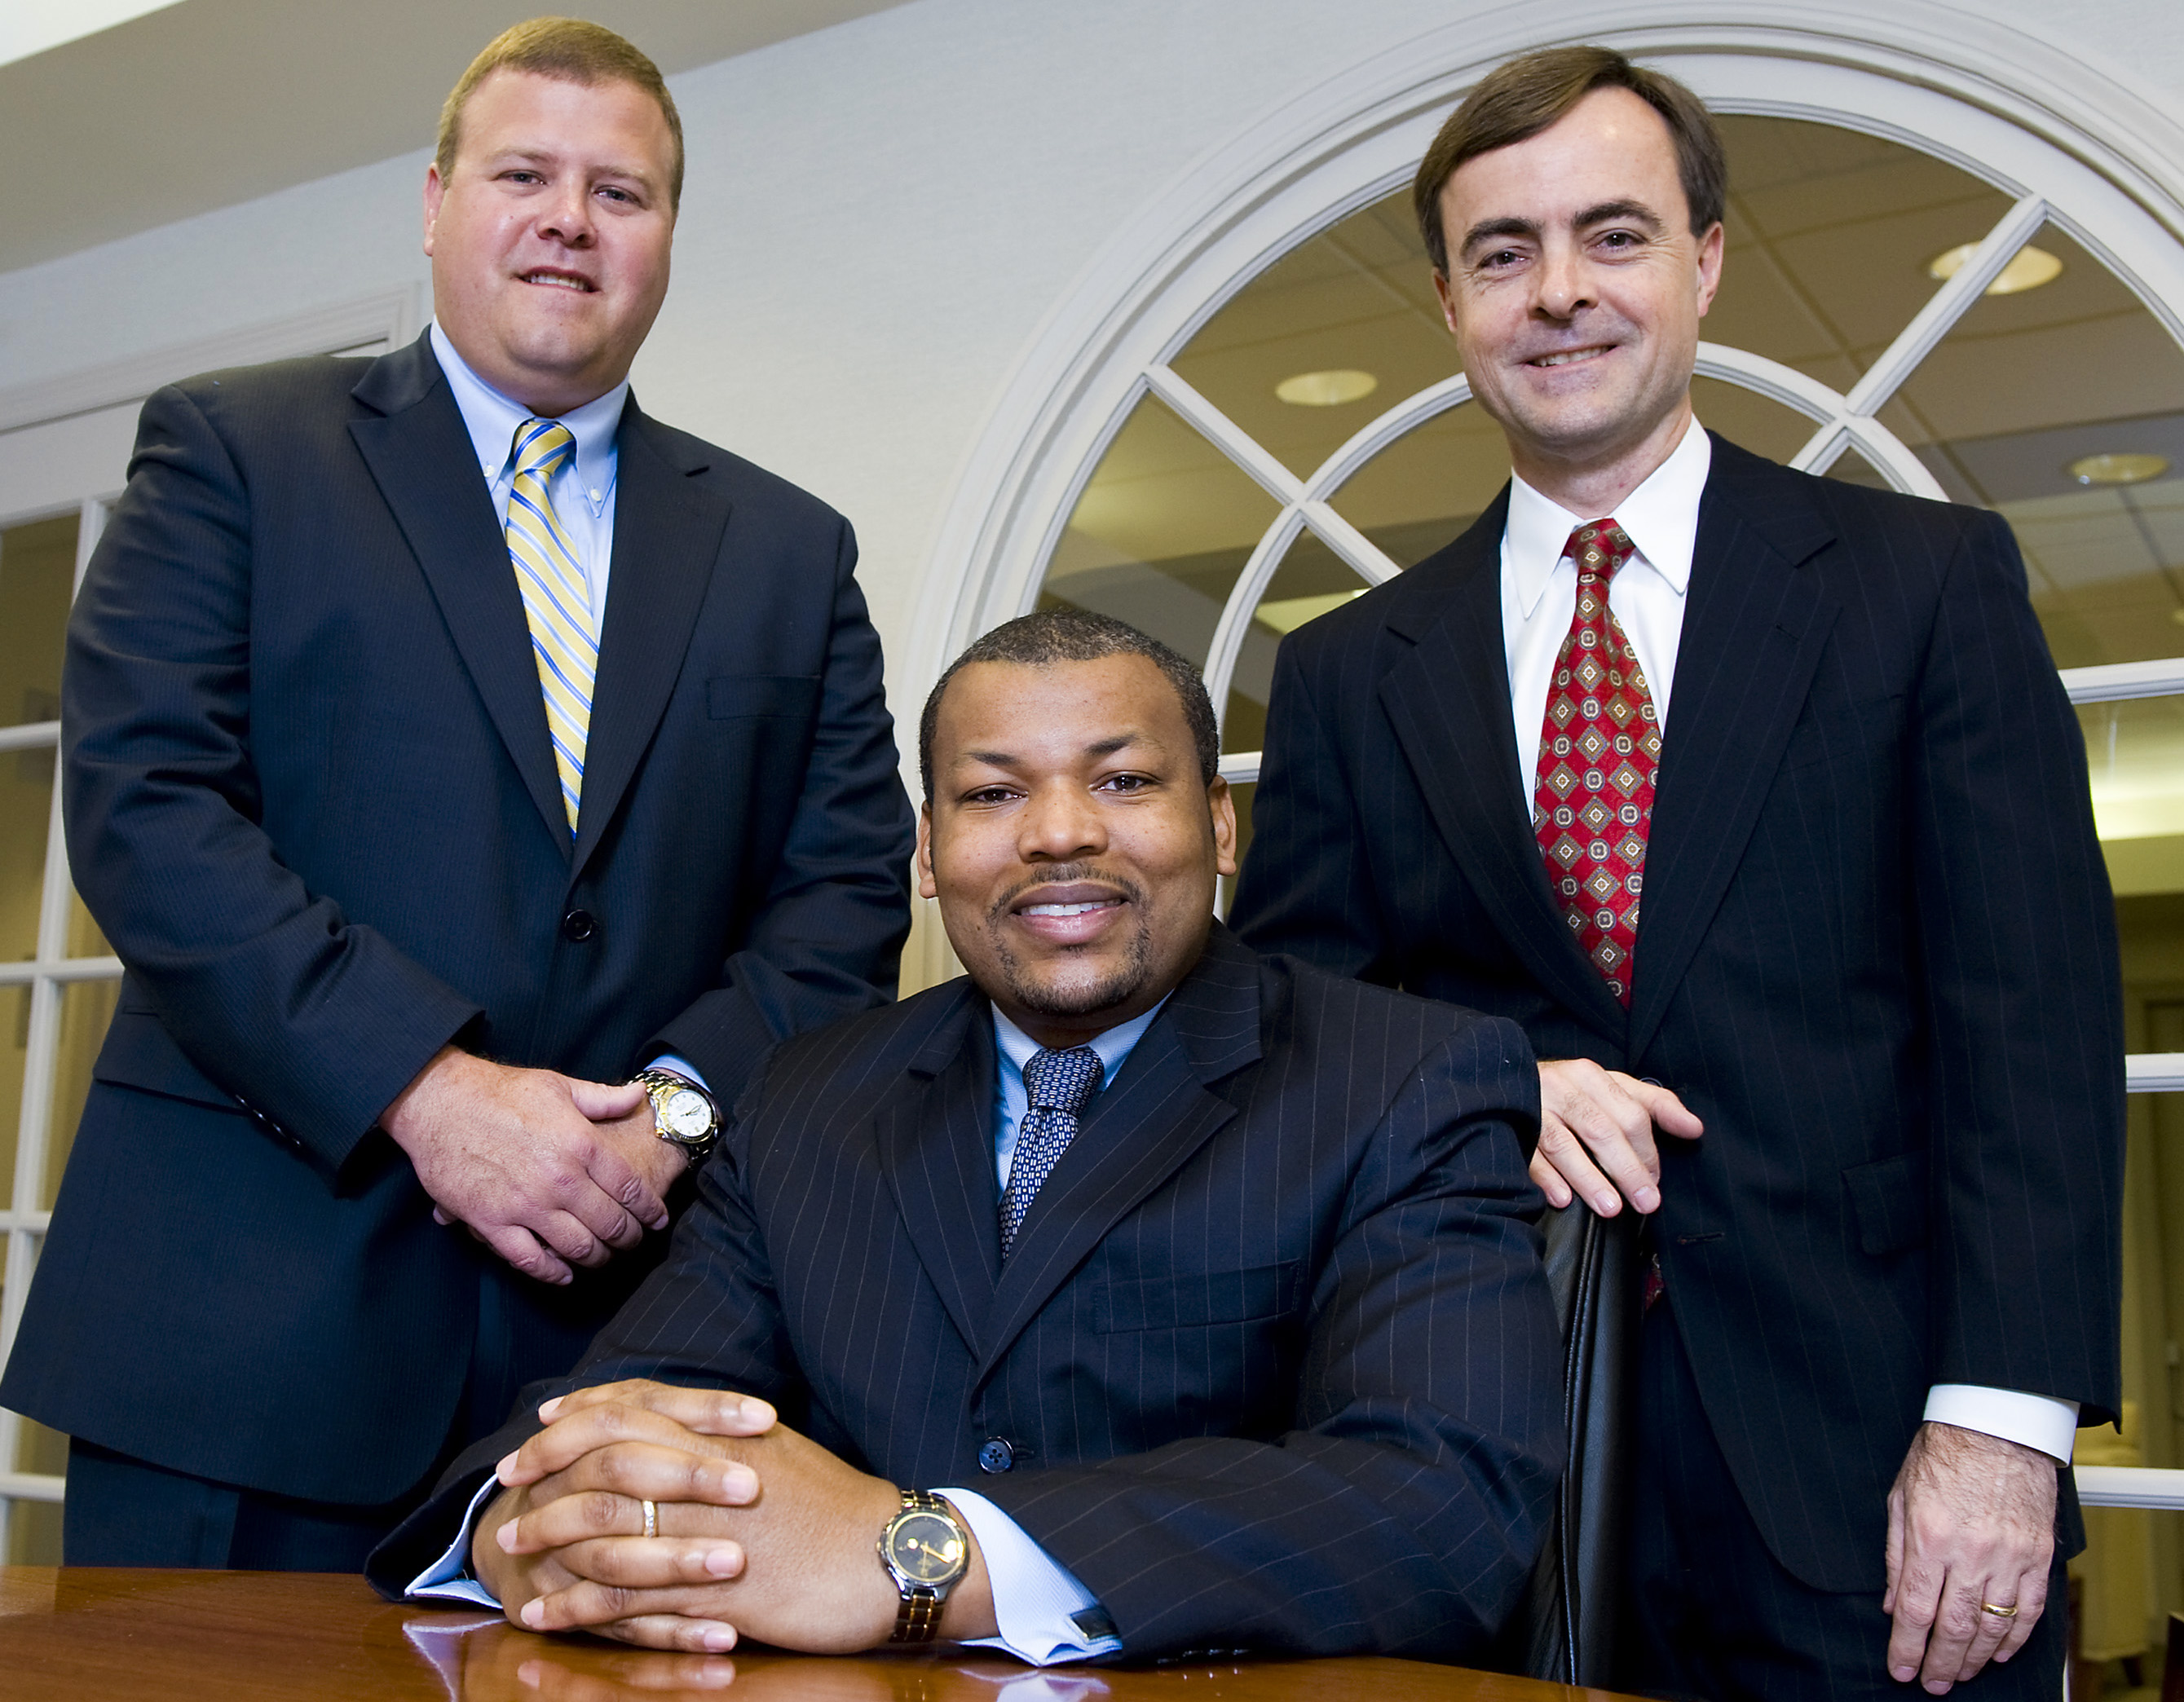 (from left to right) Eric M. Sutty, Gregory B. Williams - Office Managing Partner, and Jeffrey M. Schlerf